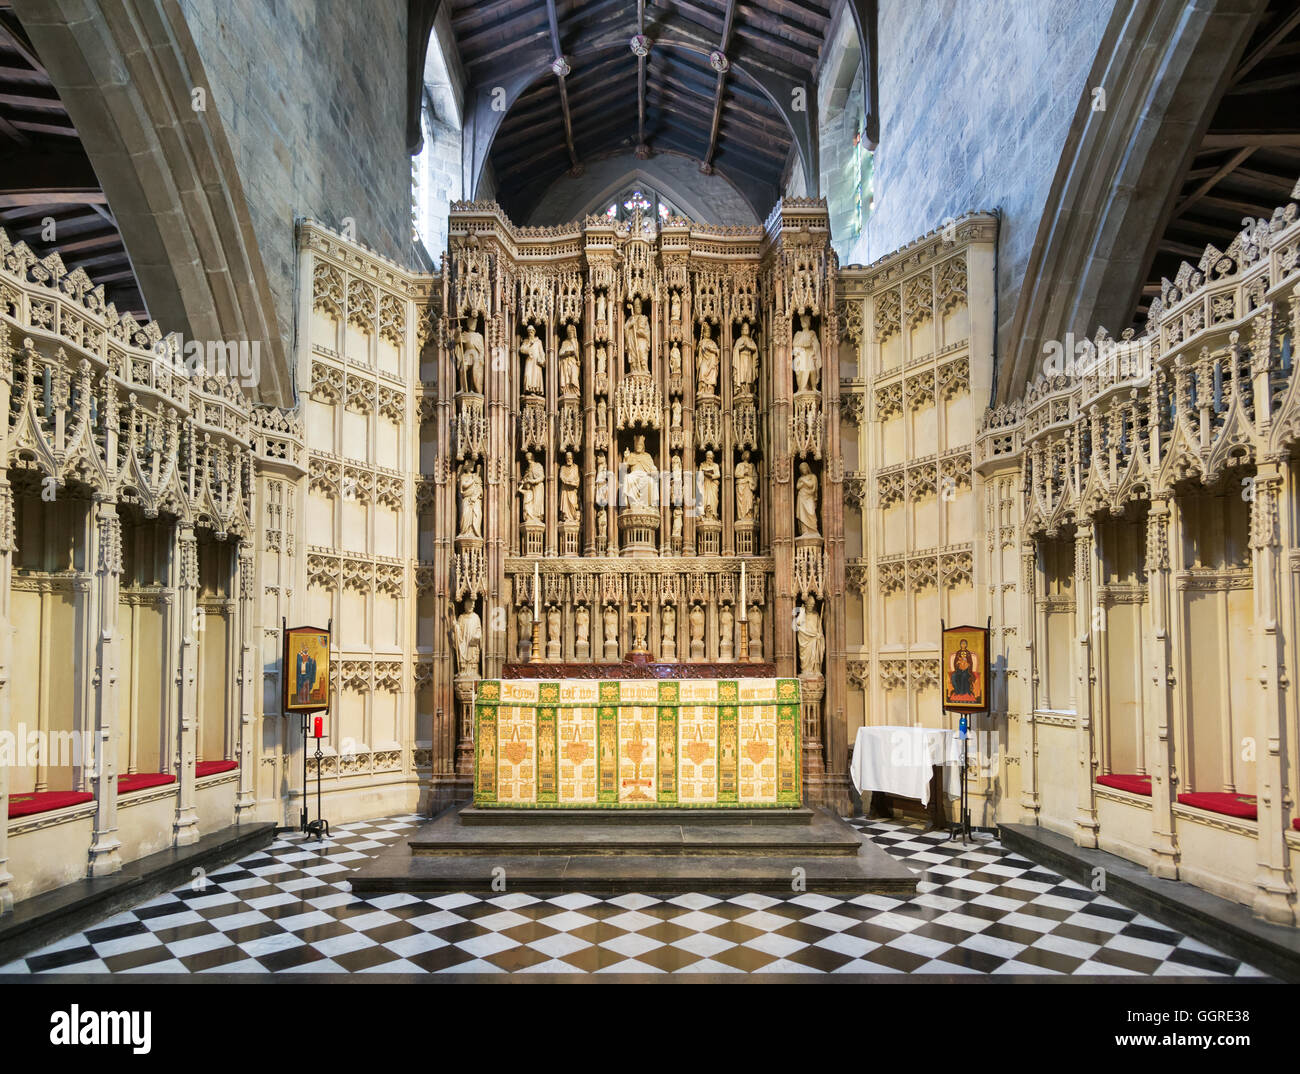 The high altar screen or reredos  at the church of St Nicholas, Newcastle cathedral, north east England, UK Stock Photo